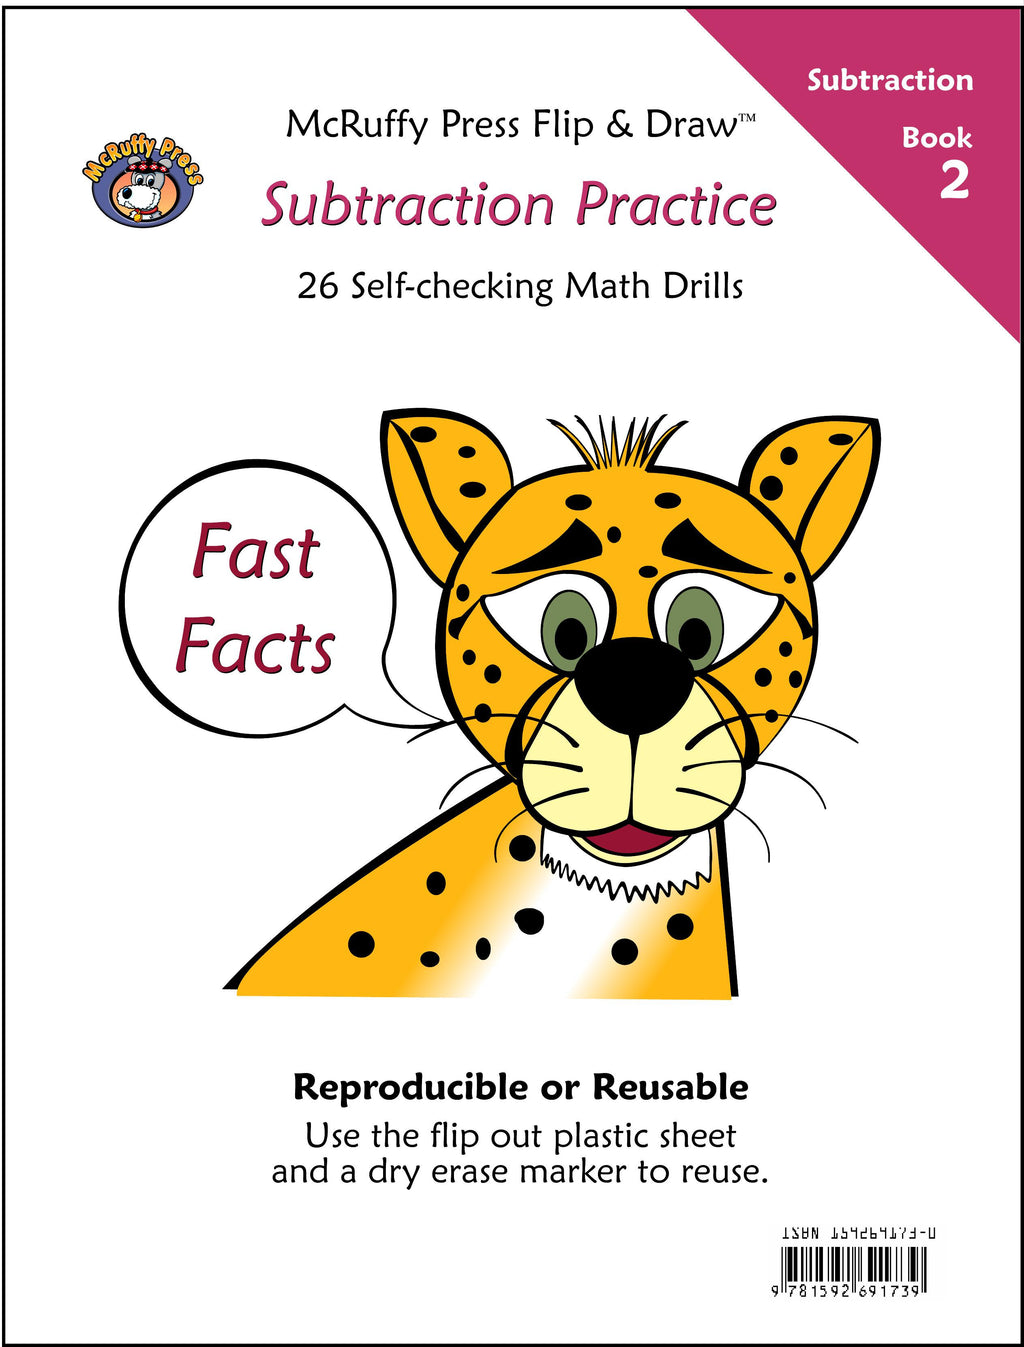 McRuffy Fast Facts Flip and Draw Books - Subtraction Practice (Book 2) - McRuffy Press